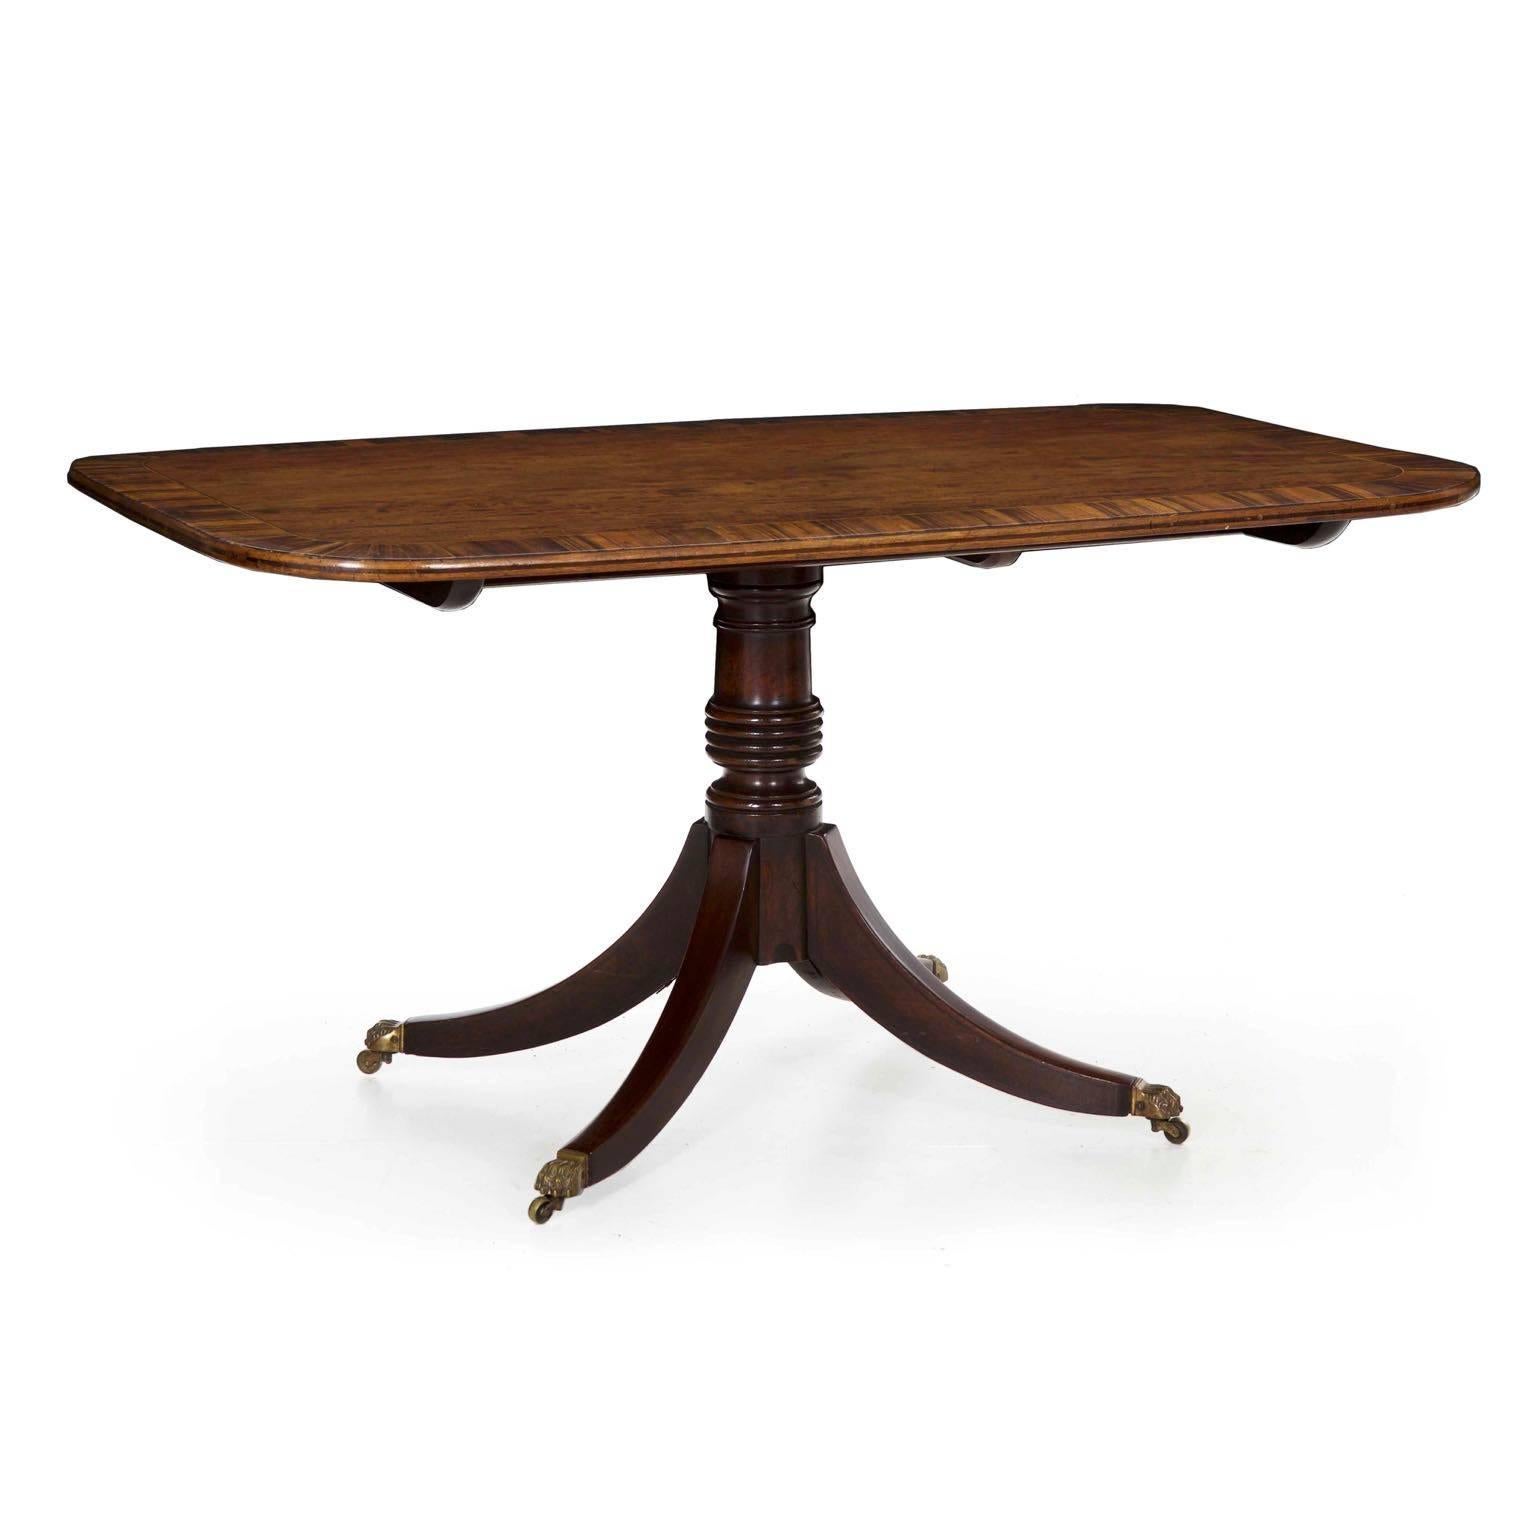 A very fine presentation piece that transforms from a breakfast table into a tilted strike point that can be tucked into the corner, little expense has been spared in designing and executing this exquisite table. The use of contrast dominates the